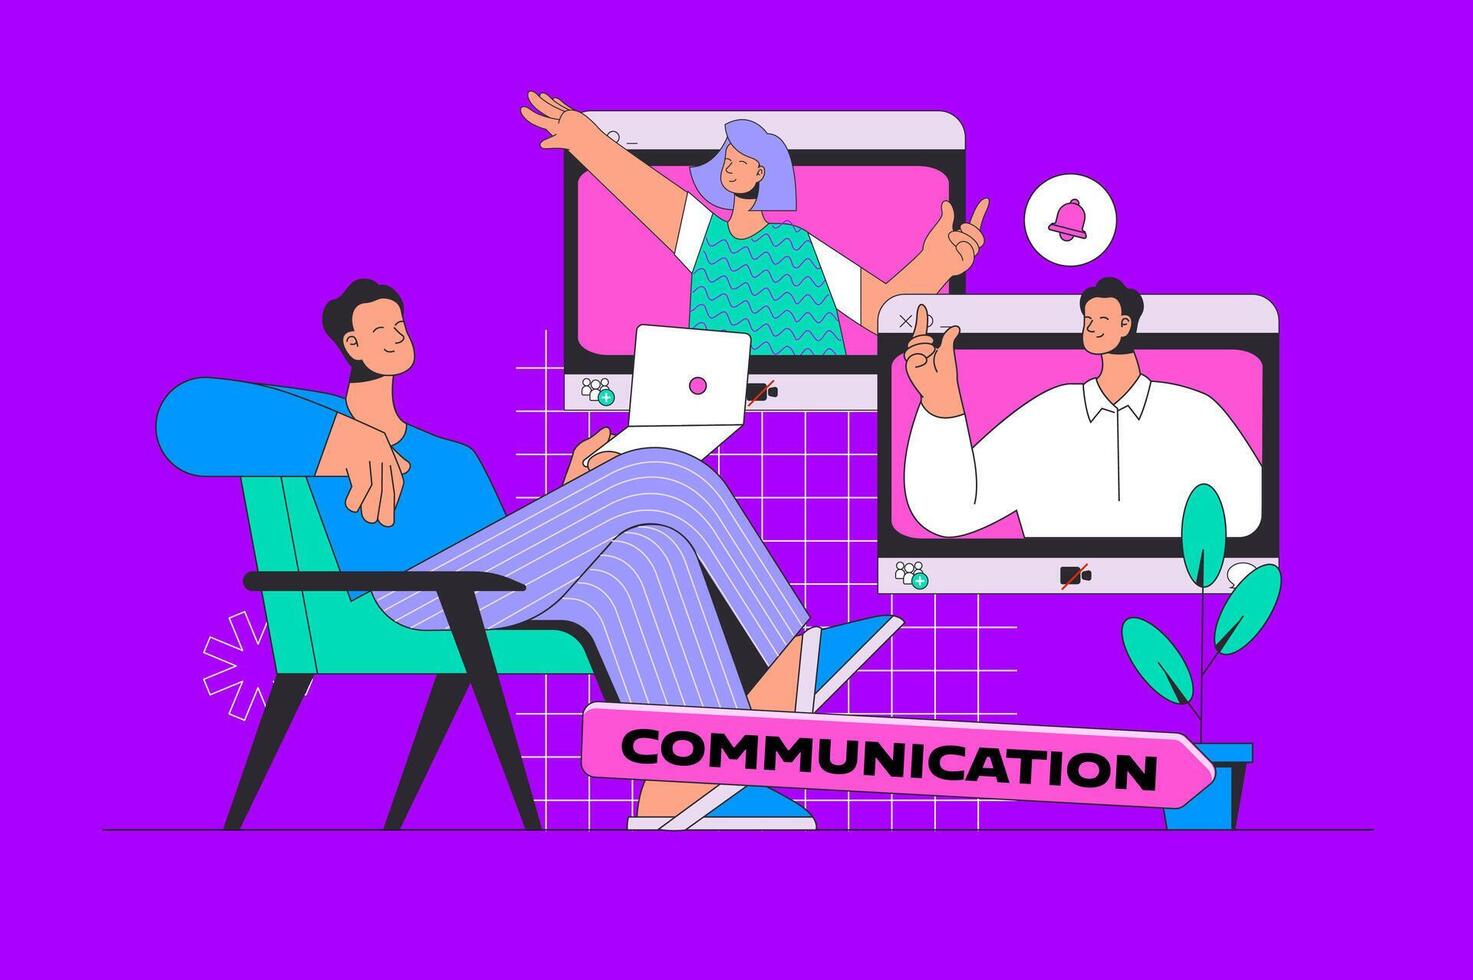 communication concept in modern flat design for web. Man calling online to friends or colleagues, talking at group chat. illustration for social media banner, marketing material. vector